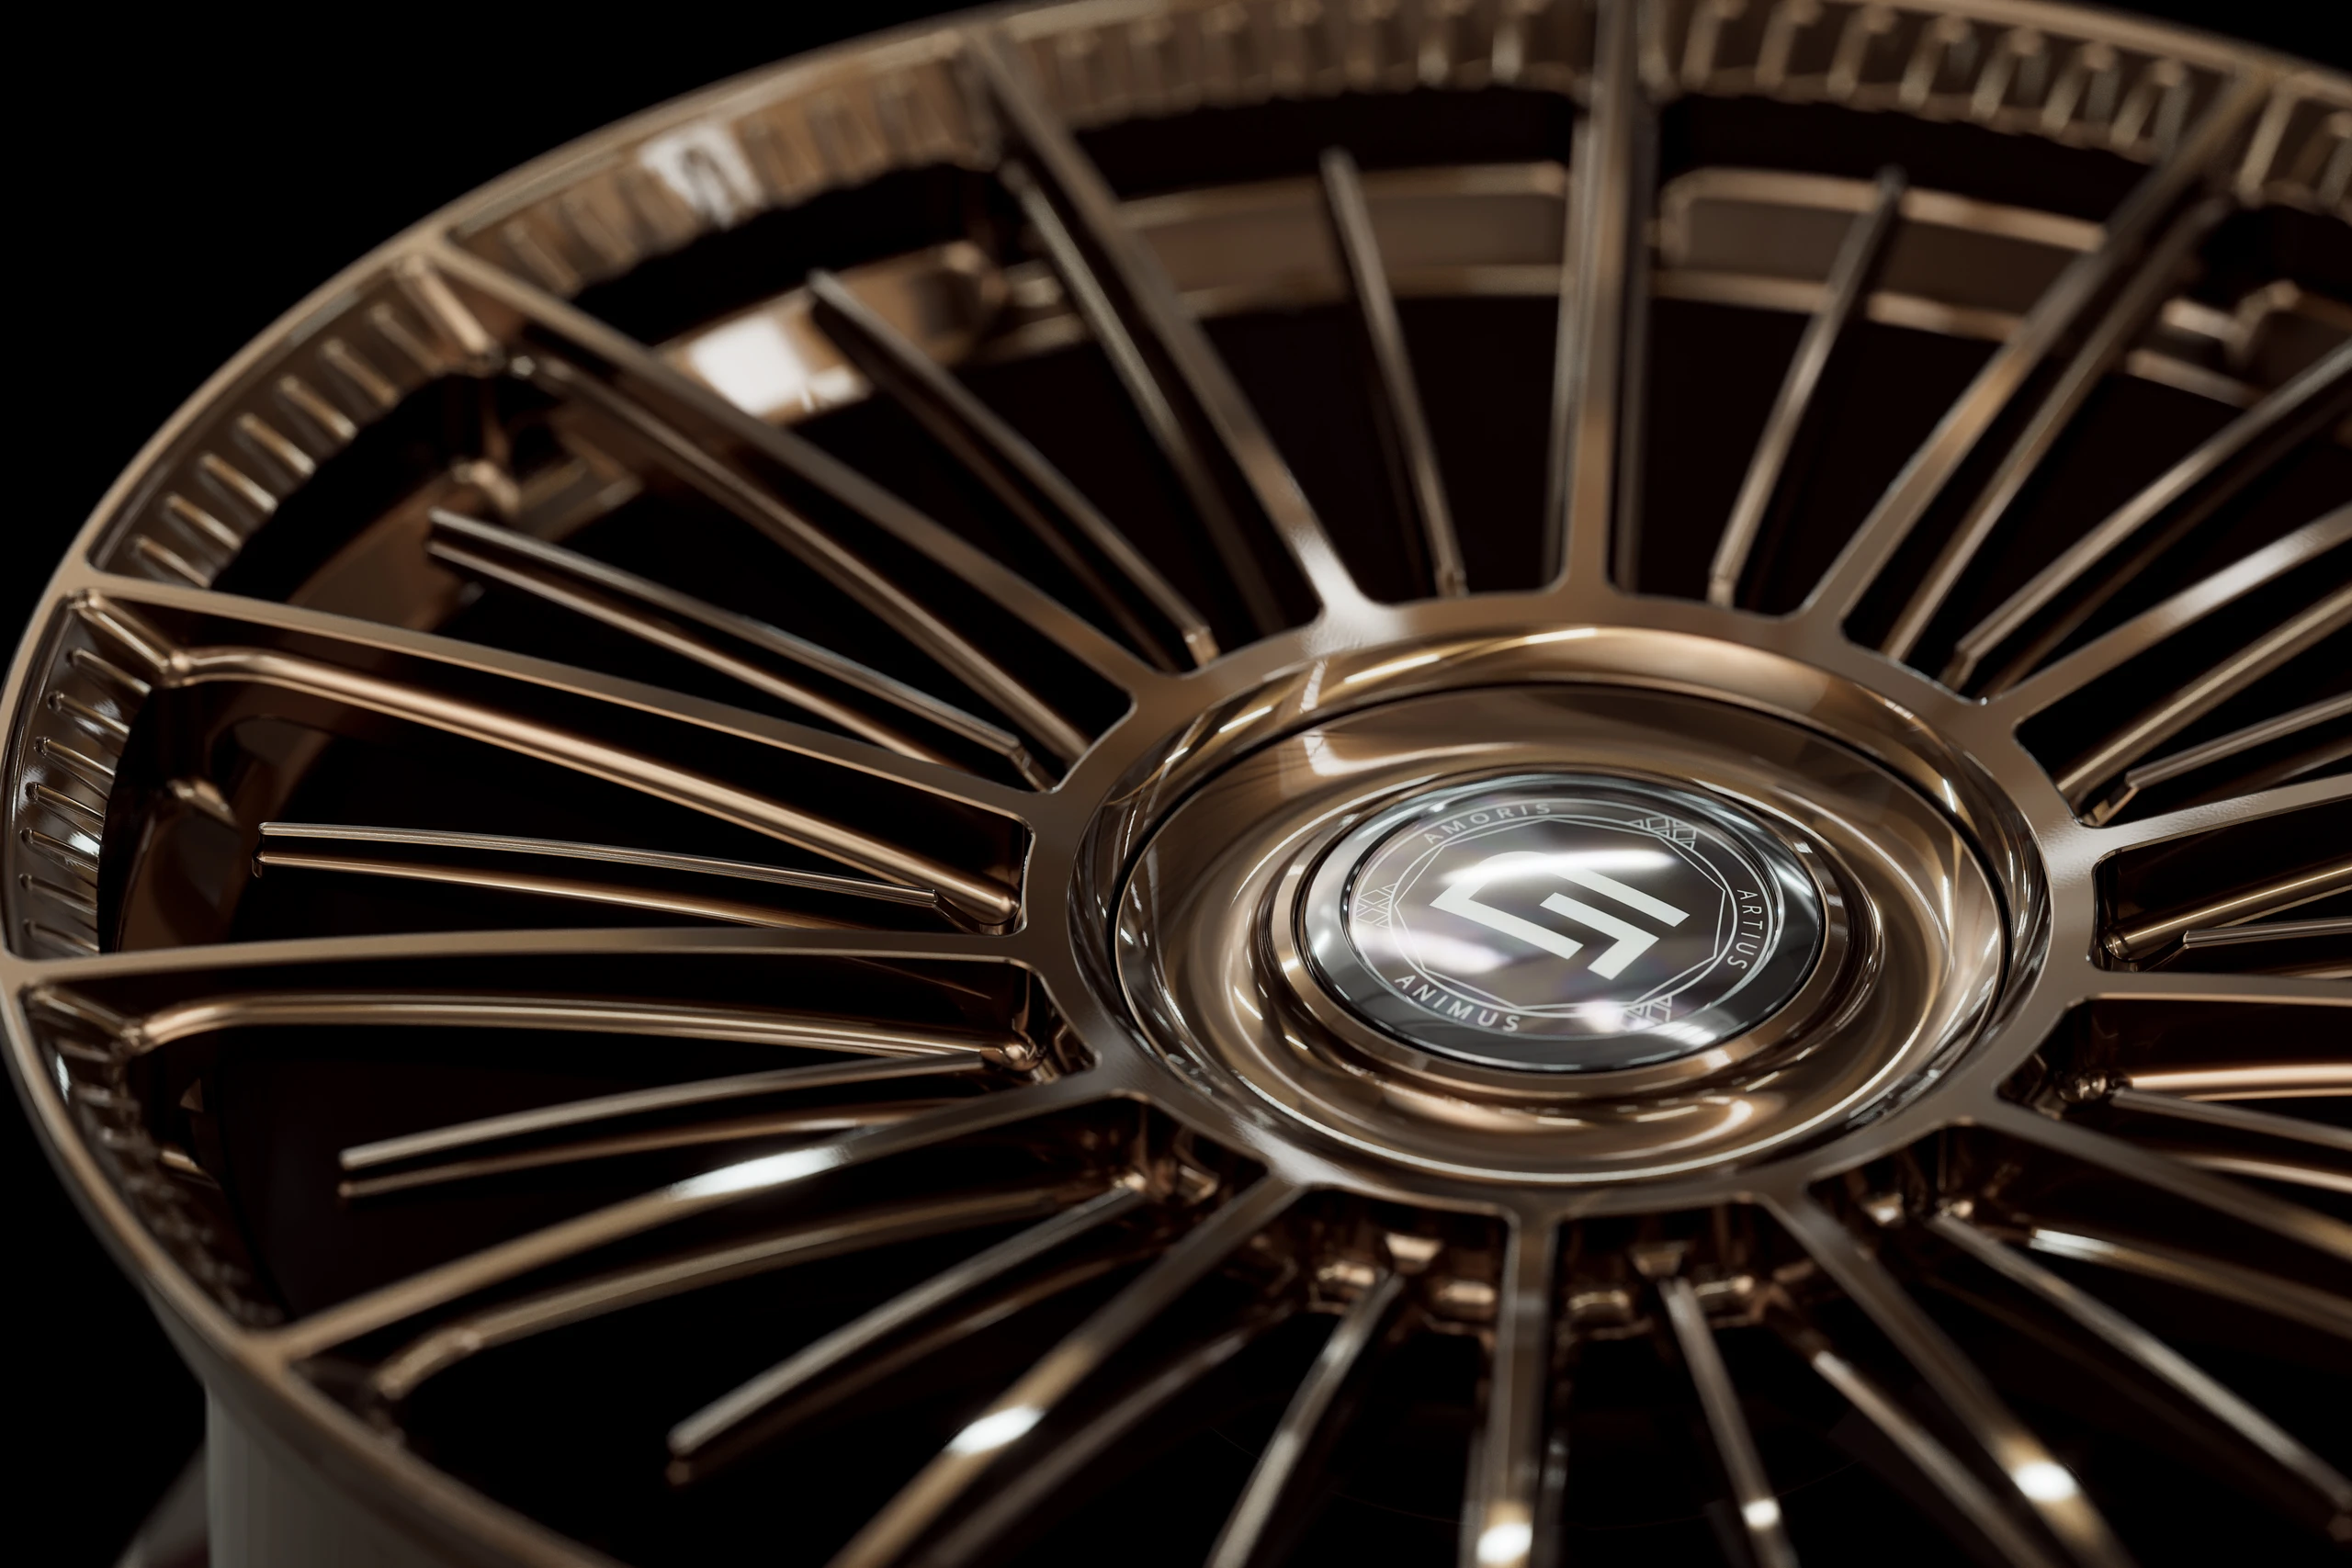 Three-quarter view of a bronze G900 monoblock wheel from Govad Forged Luxury series